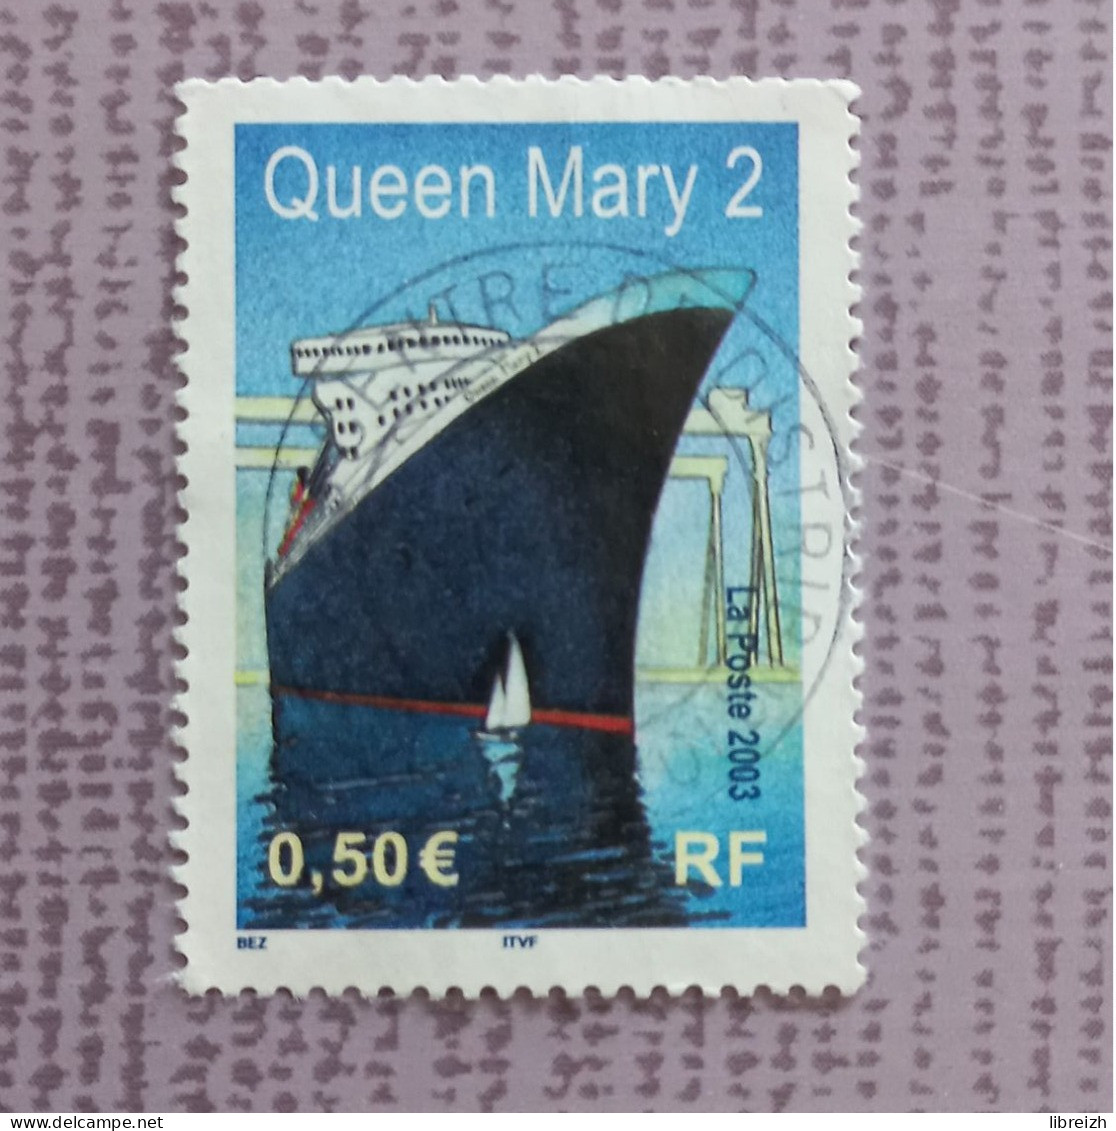 Queen Mary 2  N° 3631  Année 2003 - Usati